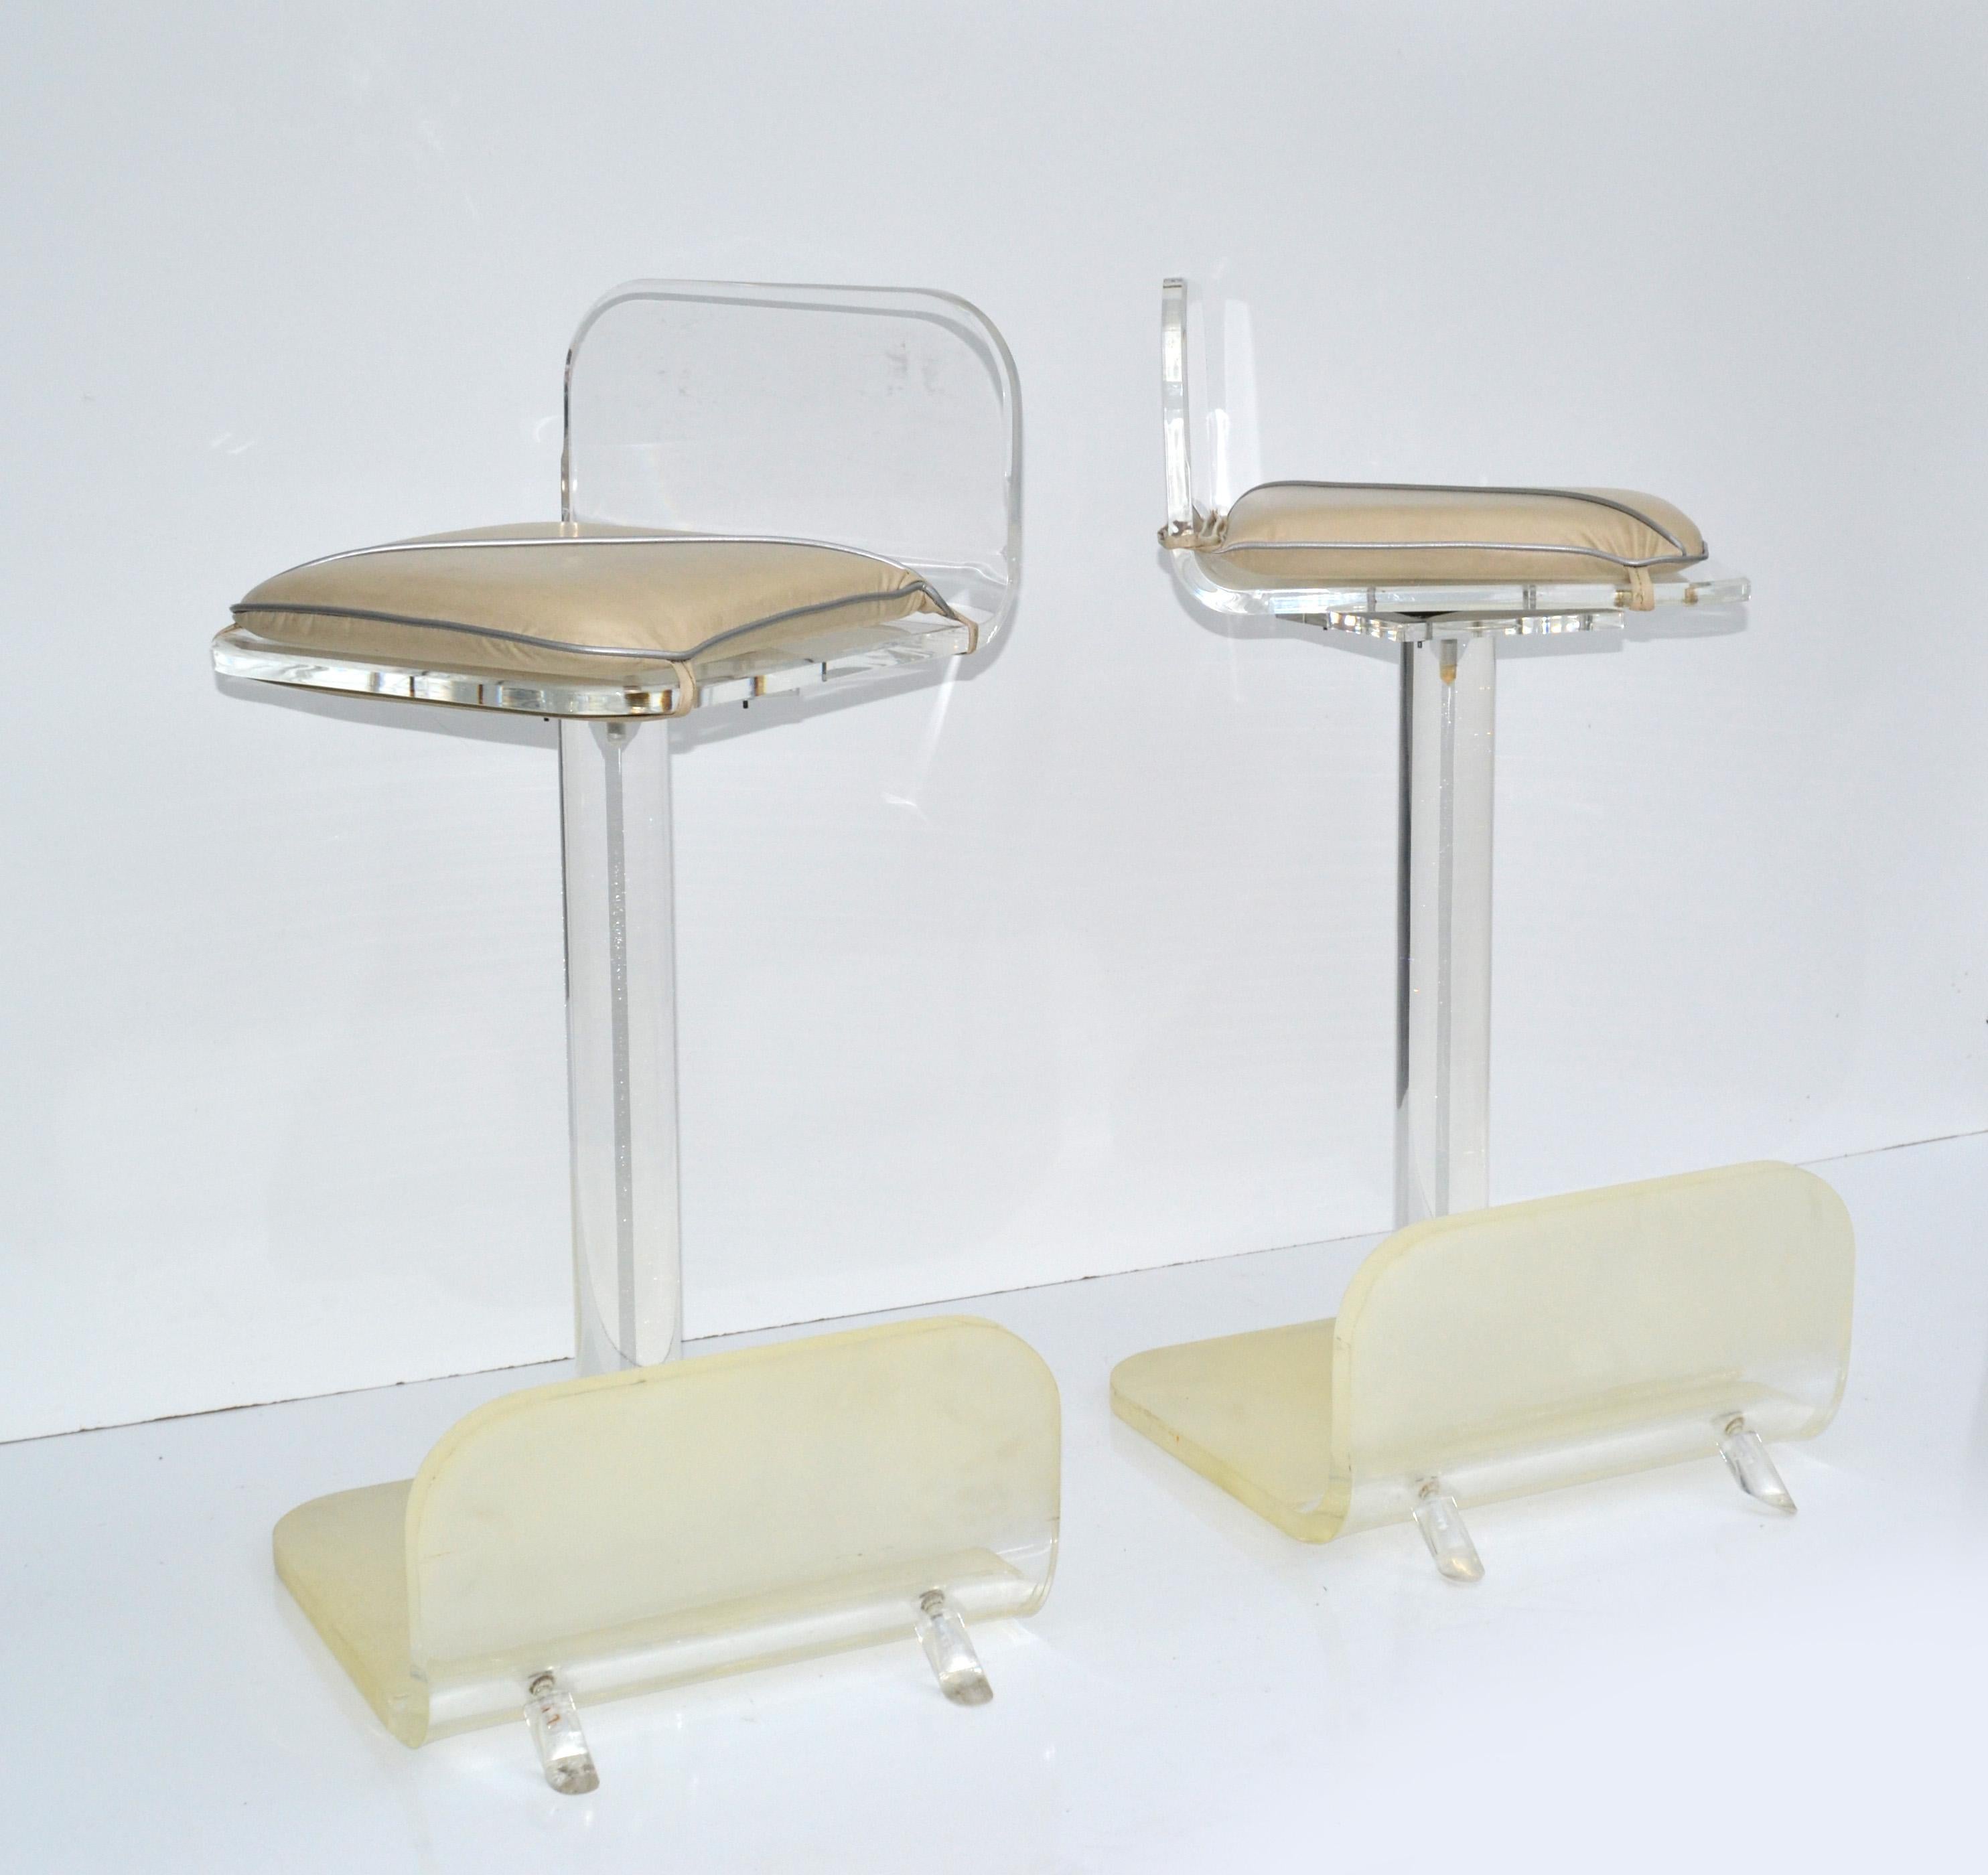 Pair of Karl Springer Mid-Century Modern frosted and clear Lucite Bar Stools made in America in the early 1980.
They have a smooth swivel and tilt Function and come with the original padded seat cushion.
In original vintage condition with some